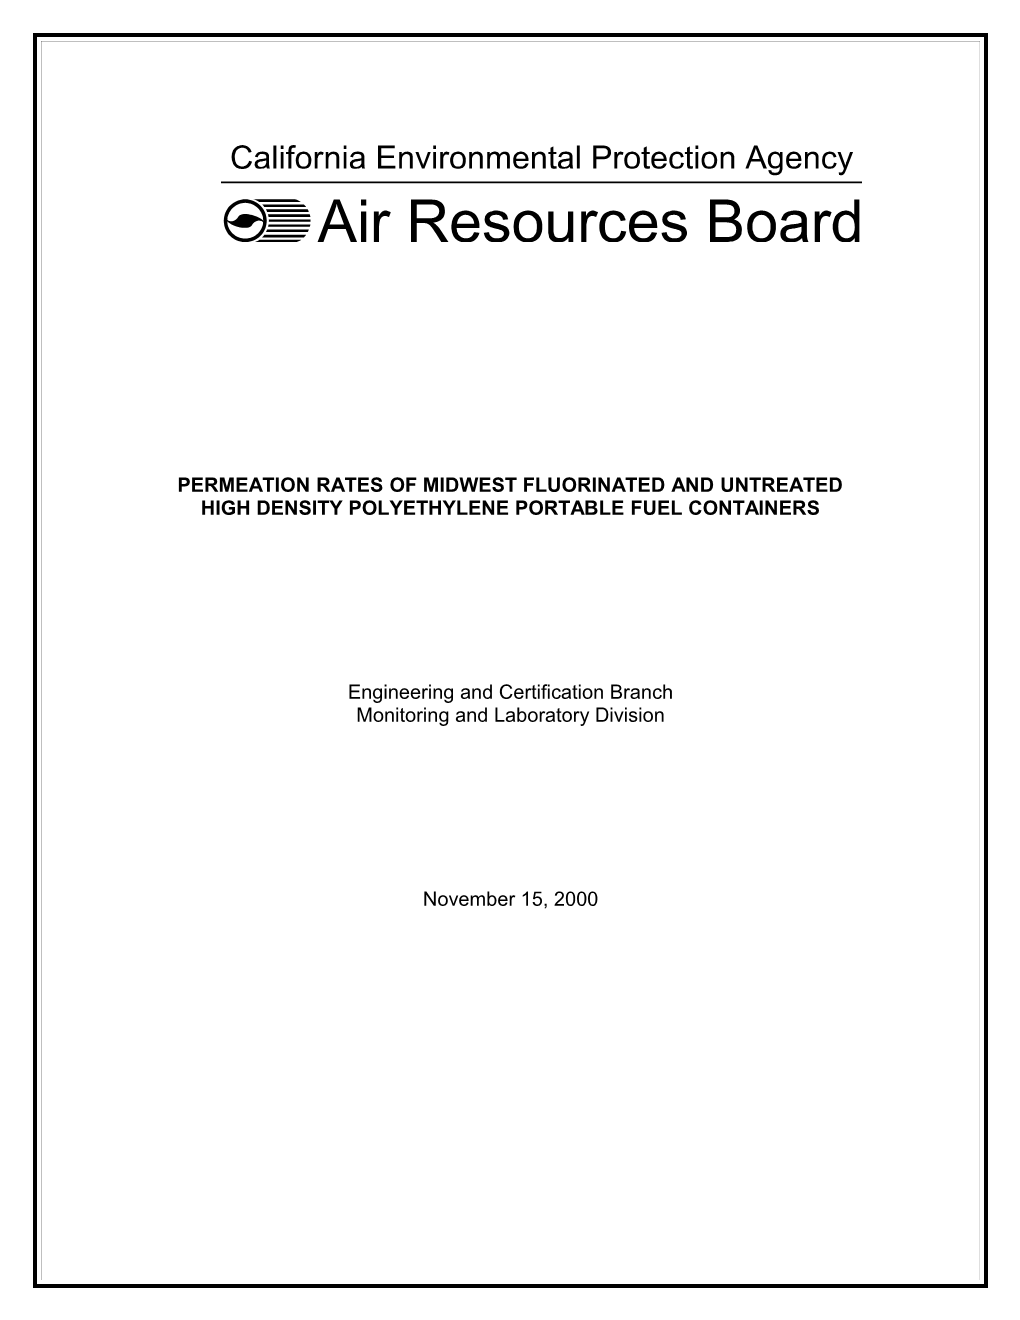 Research Abstract: 2000-11-15 Permeation Rates of Midwest Fluorinated and Untreated High